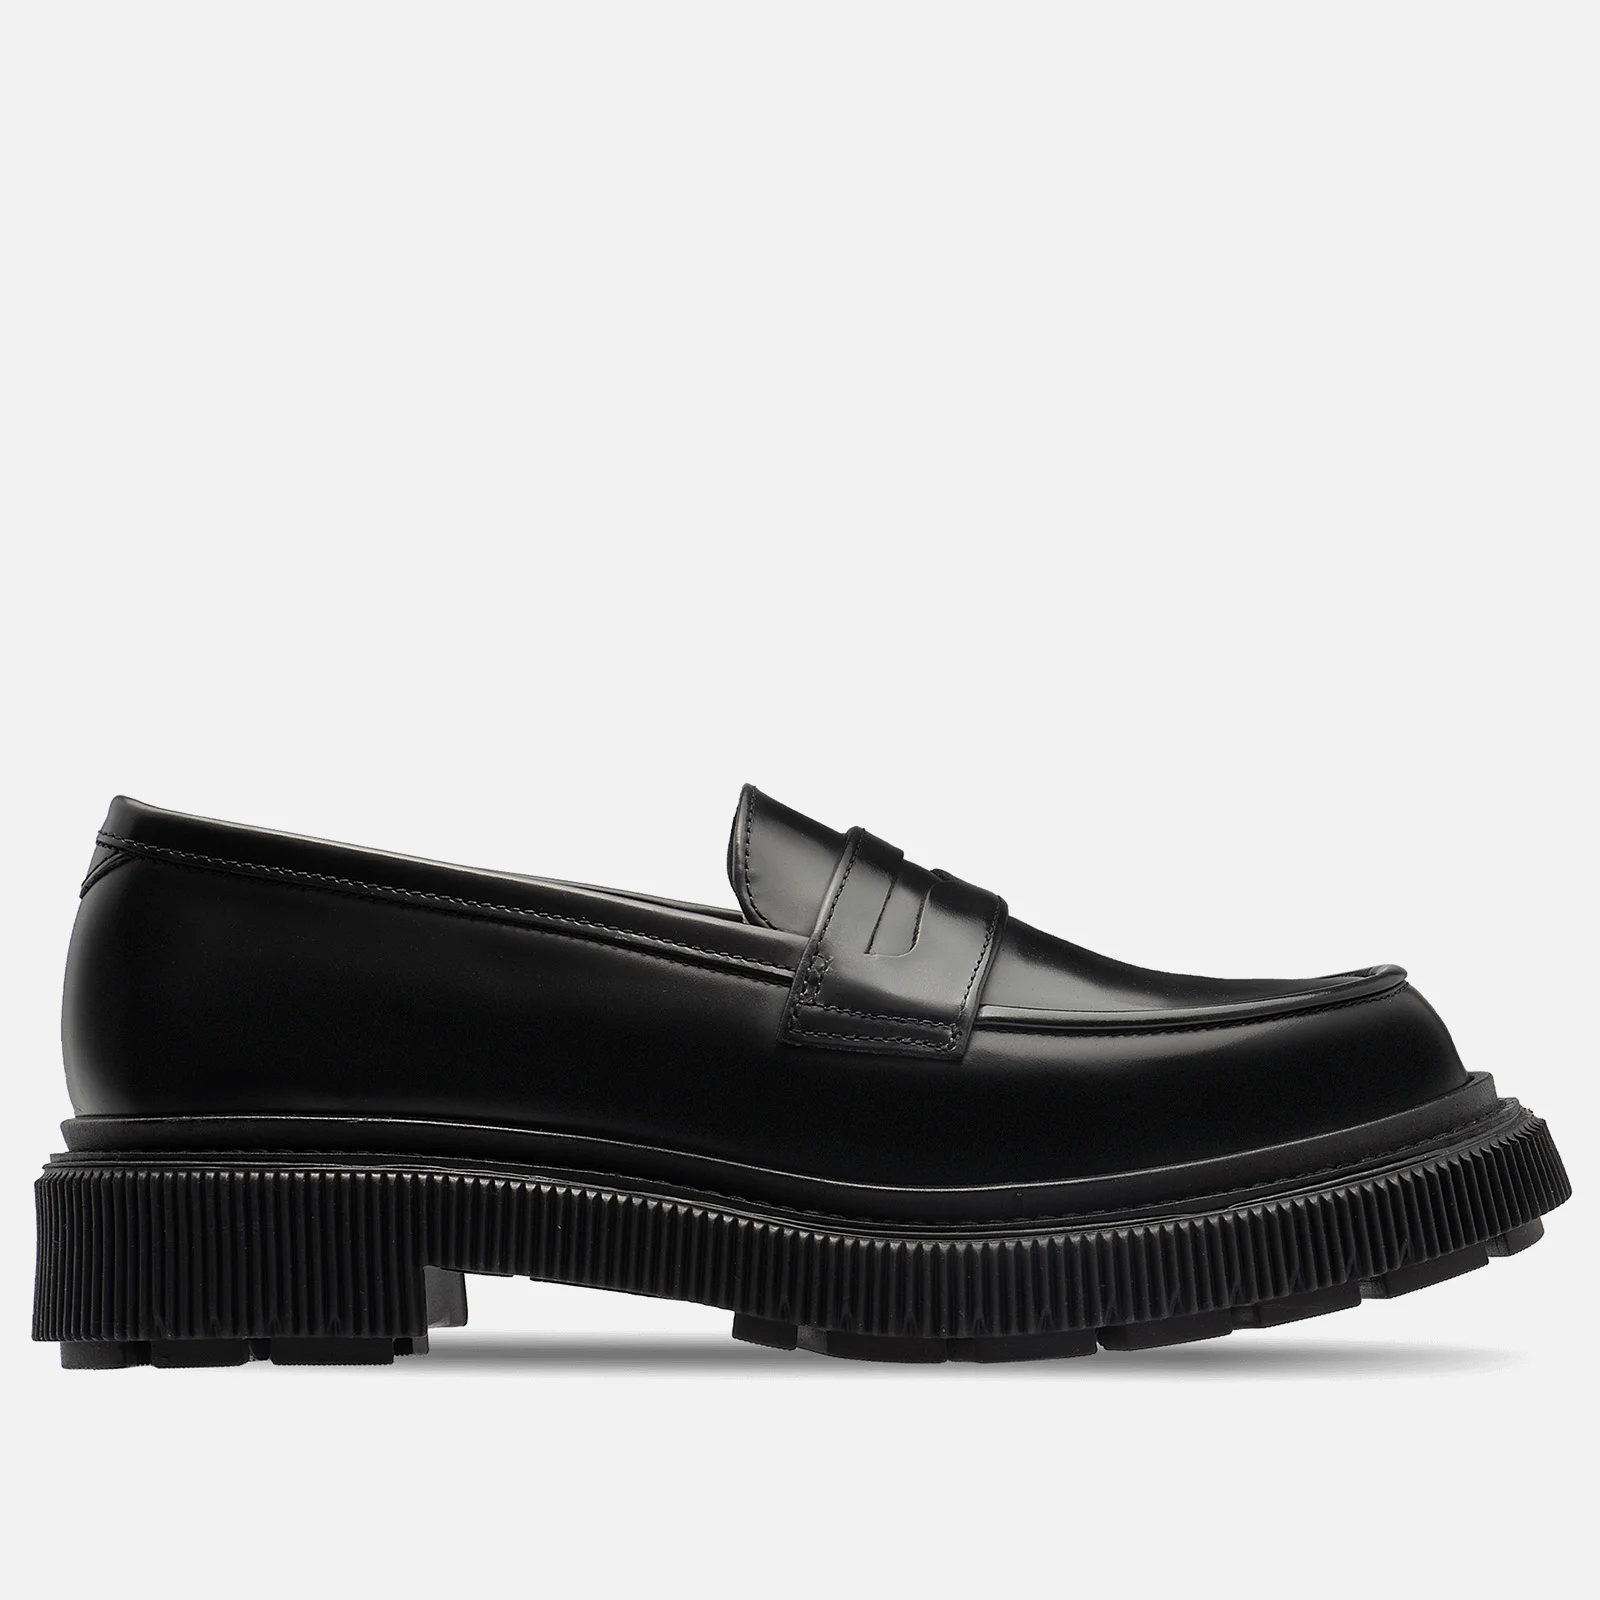 Adieu Men's Type 159 Leather Loafers - Black Image 1